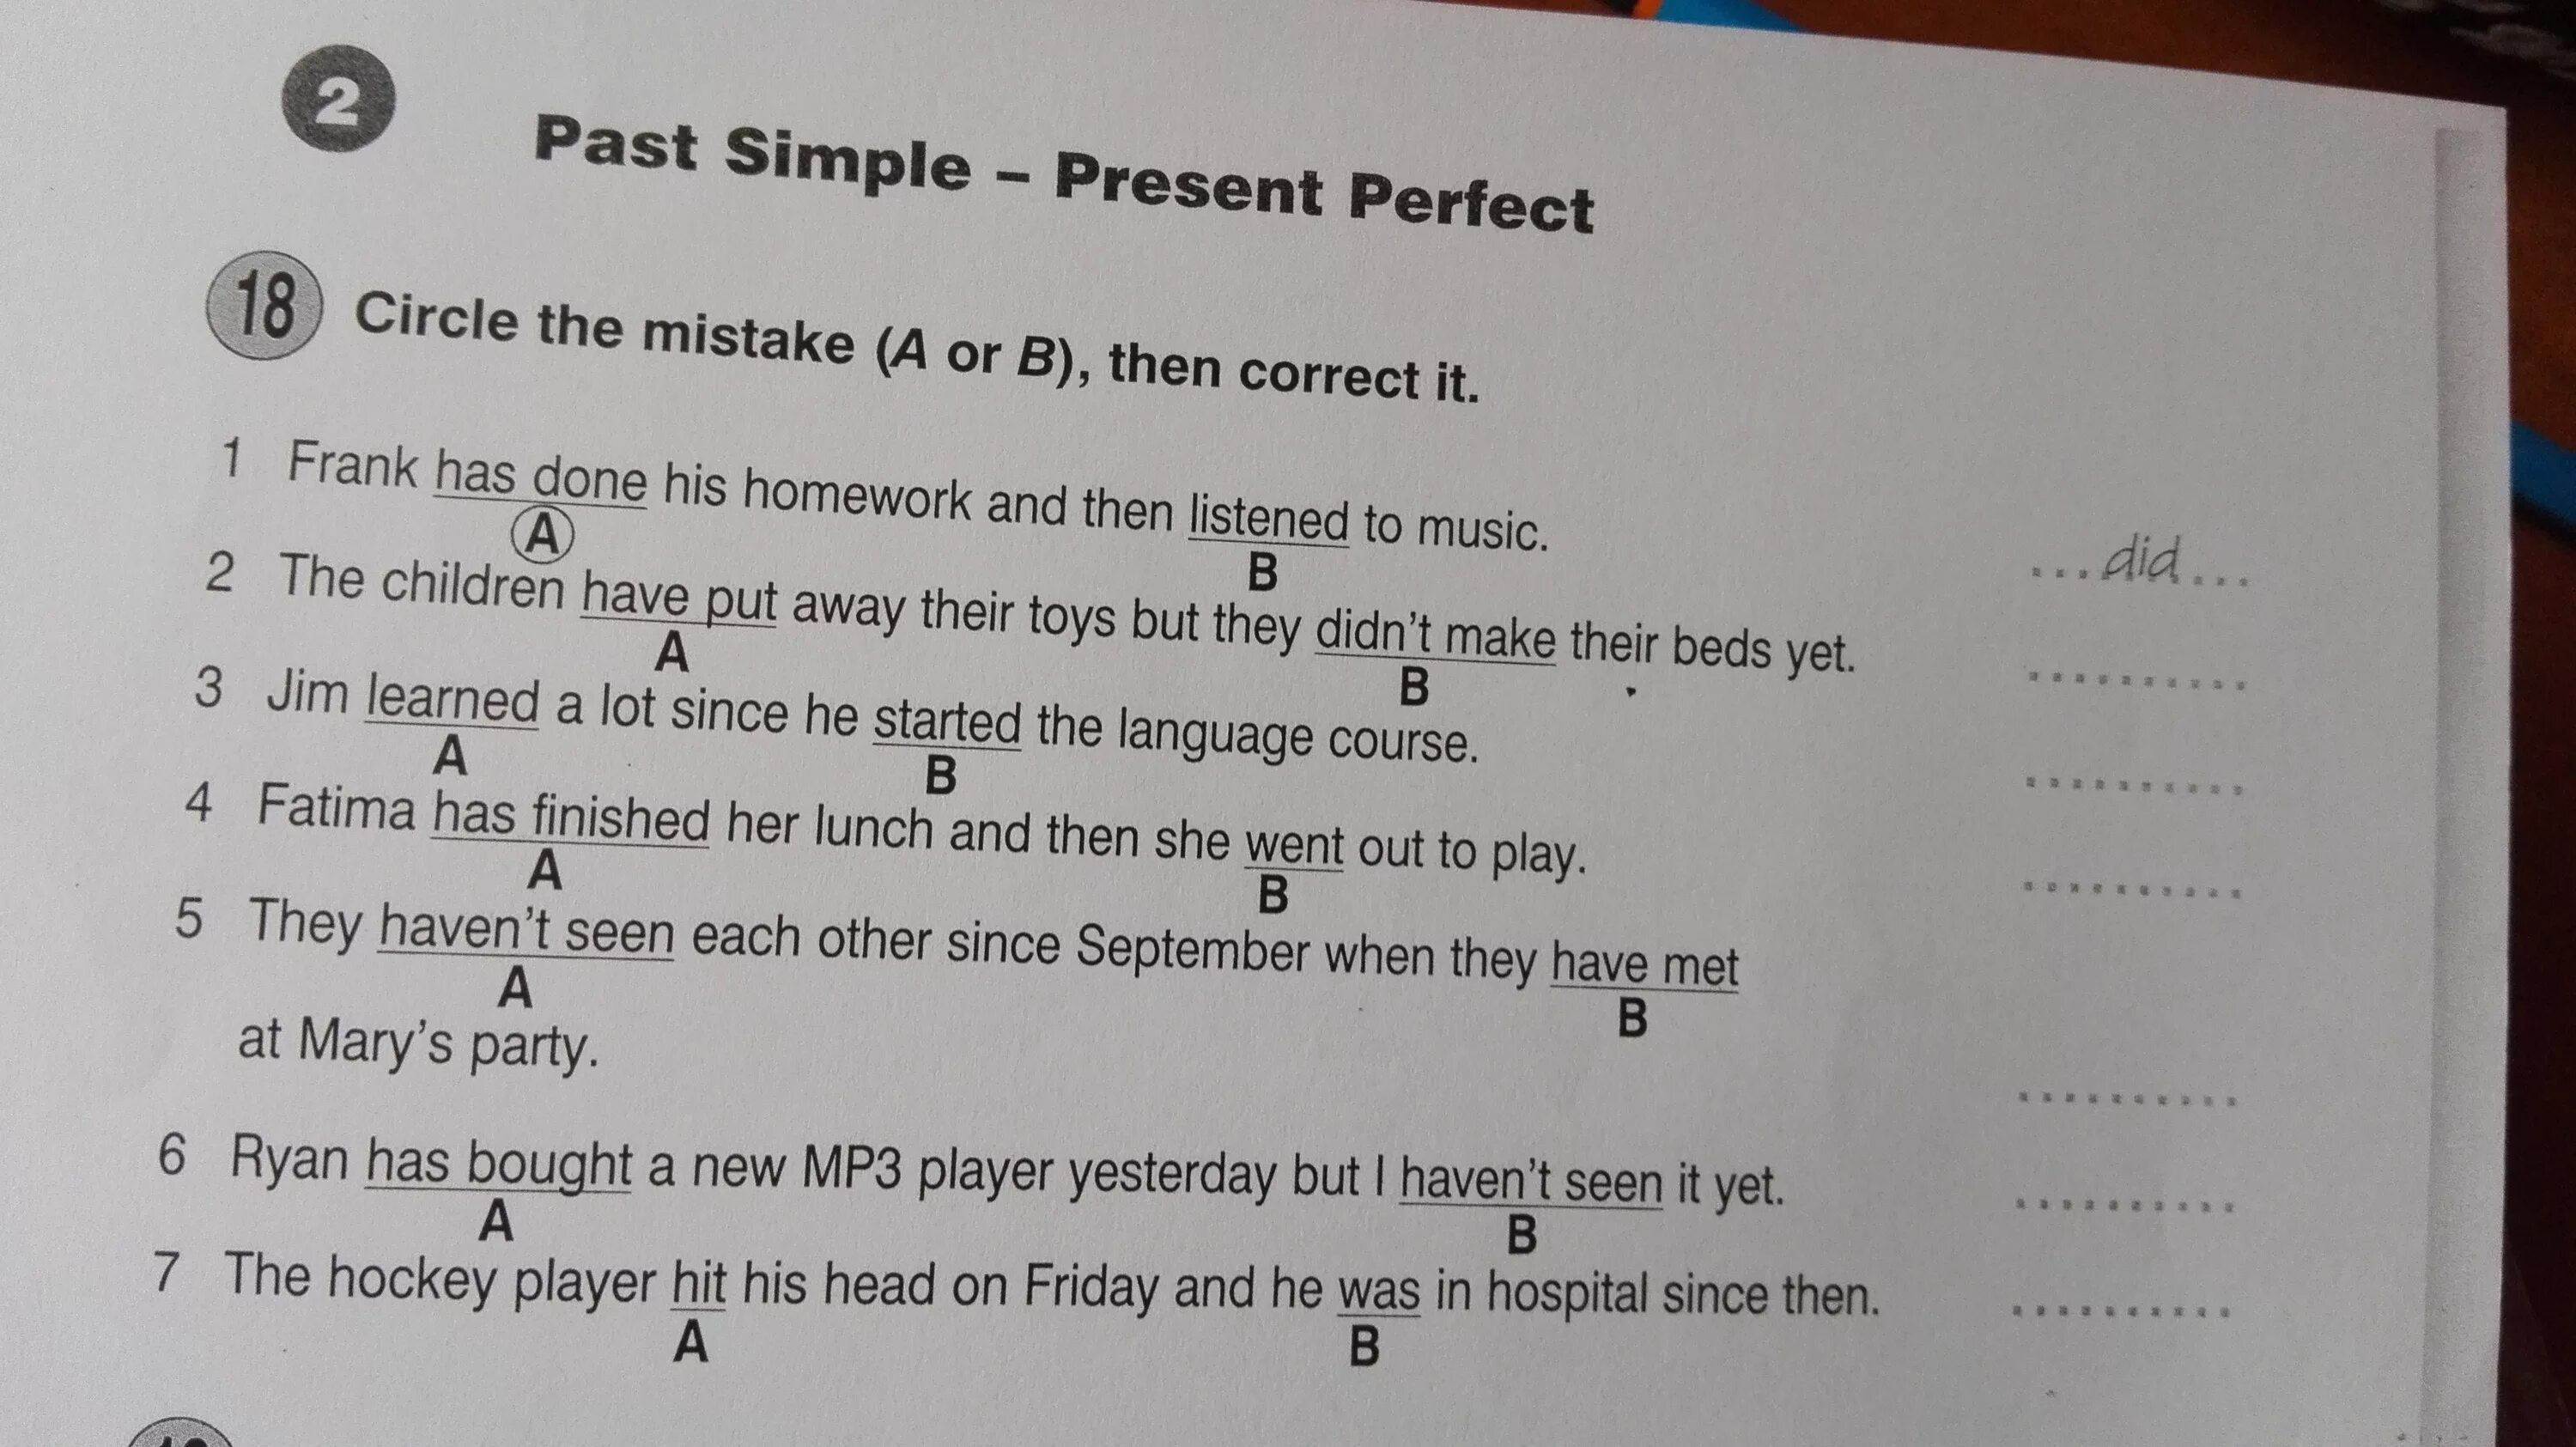 Past simple present perfect Frank has done his homework.